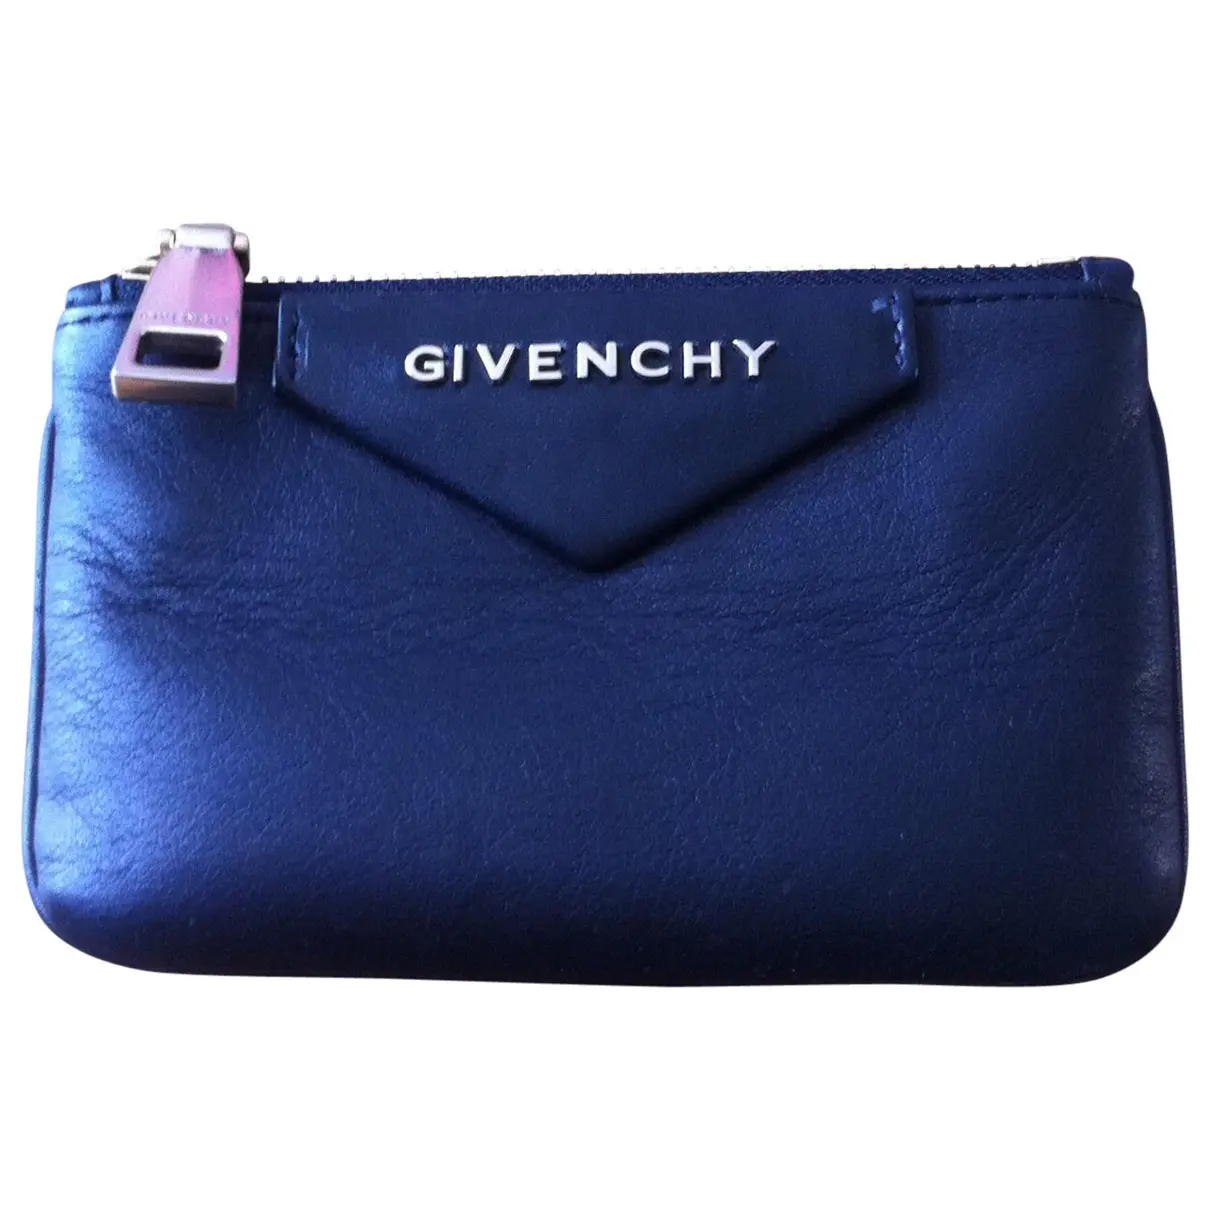 Black Leather Purse Givenchy